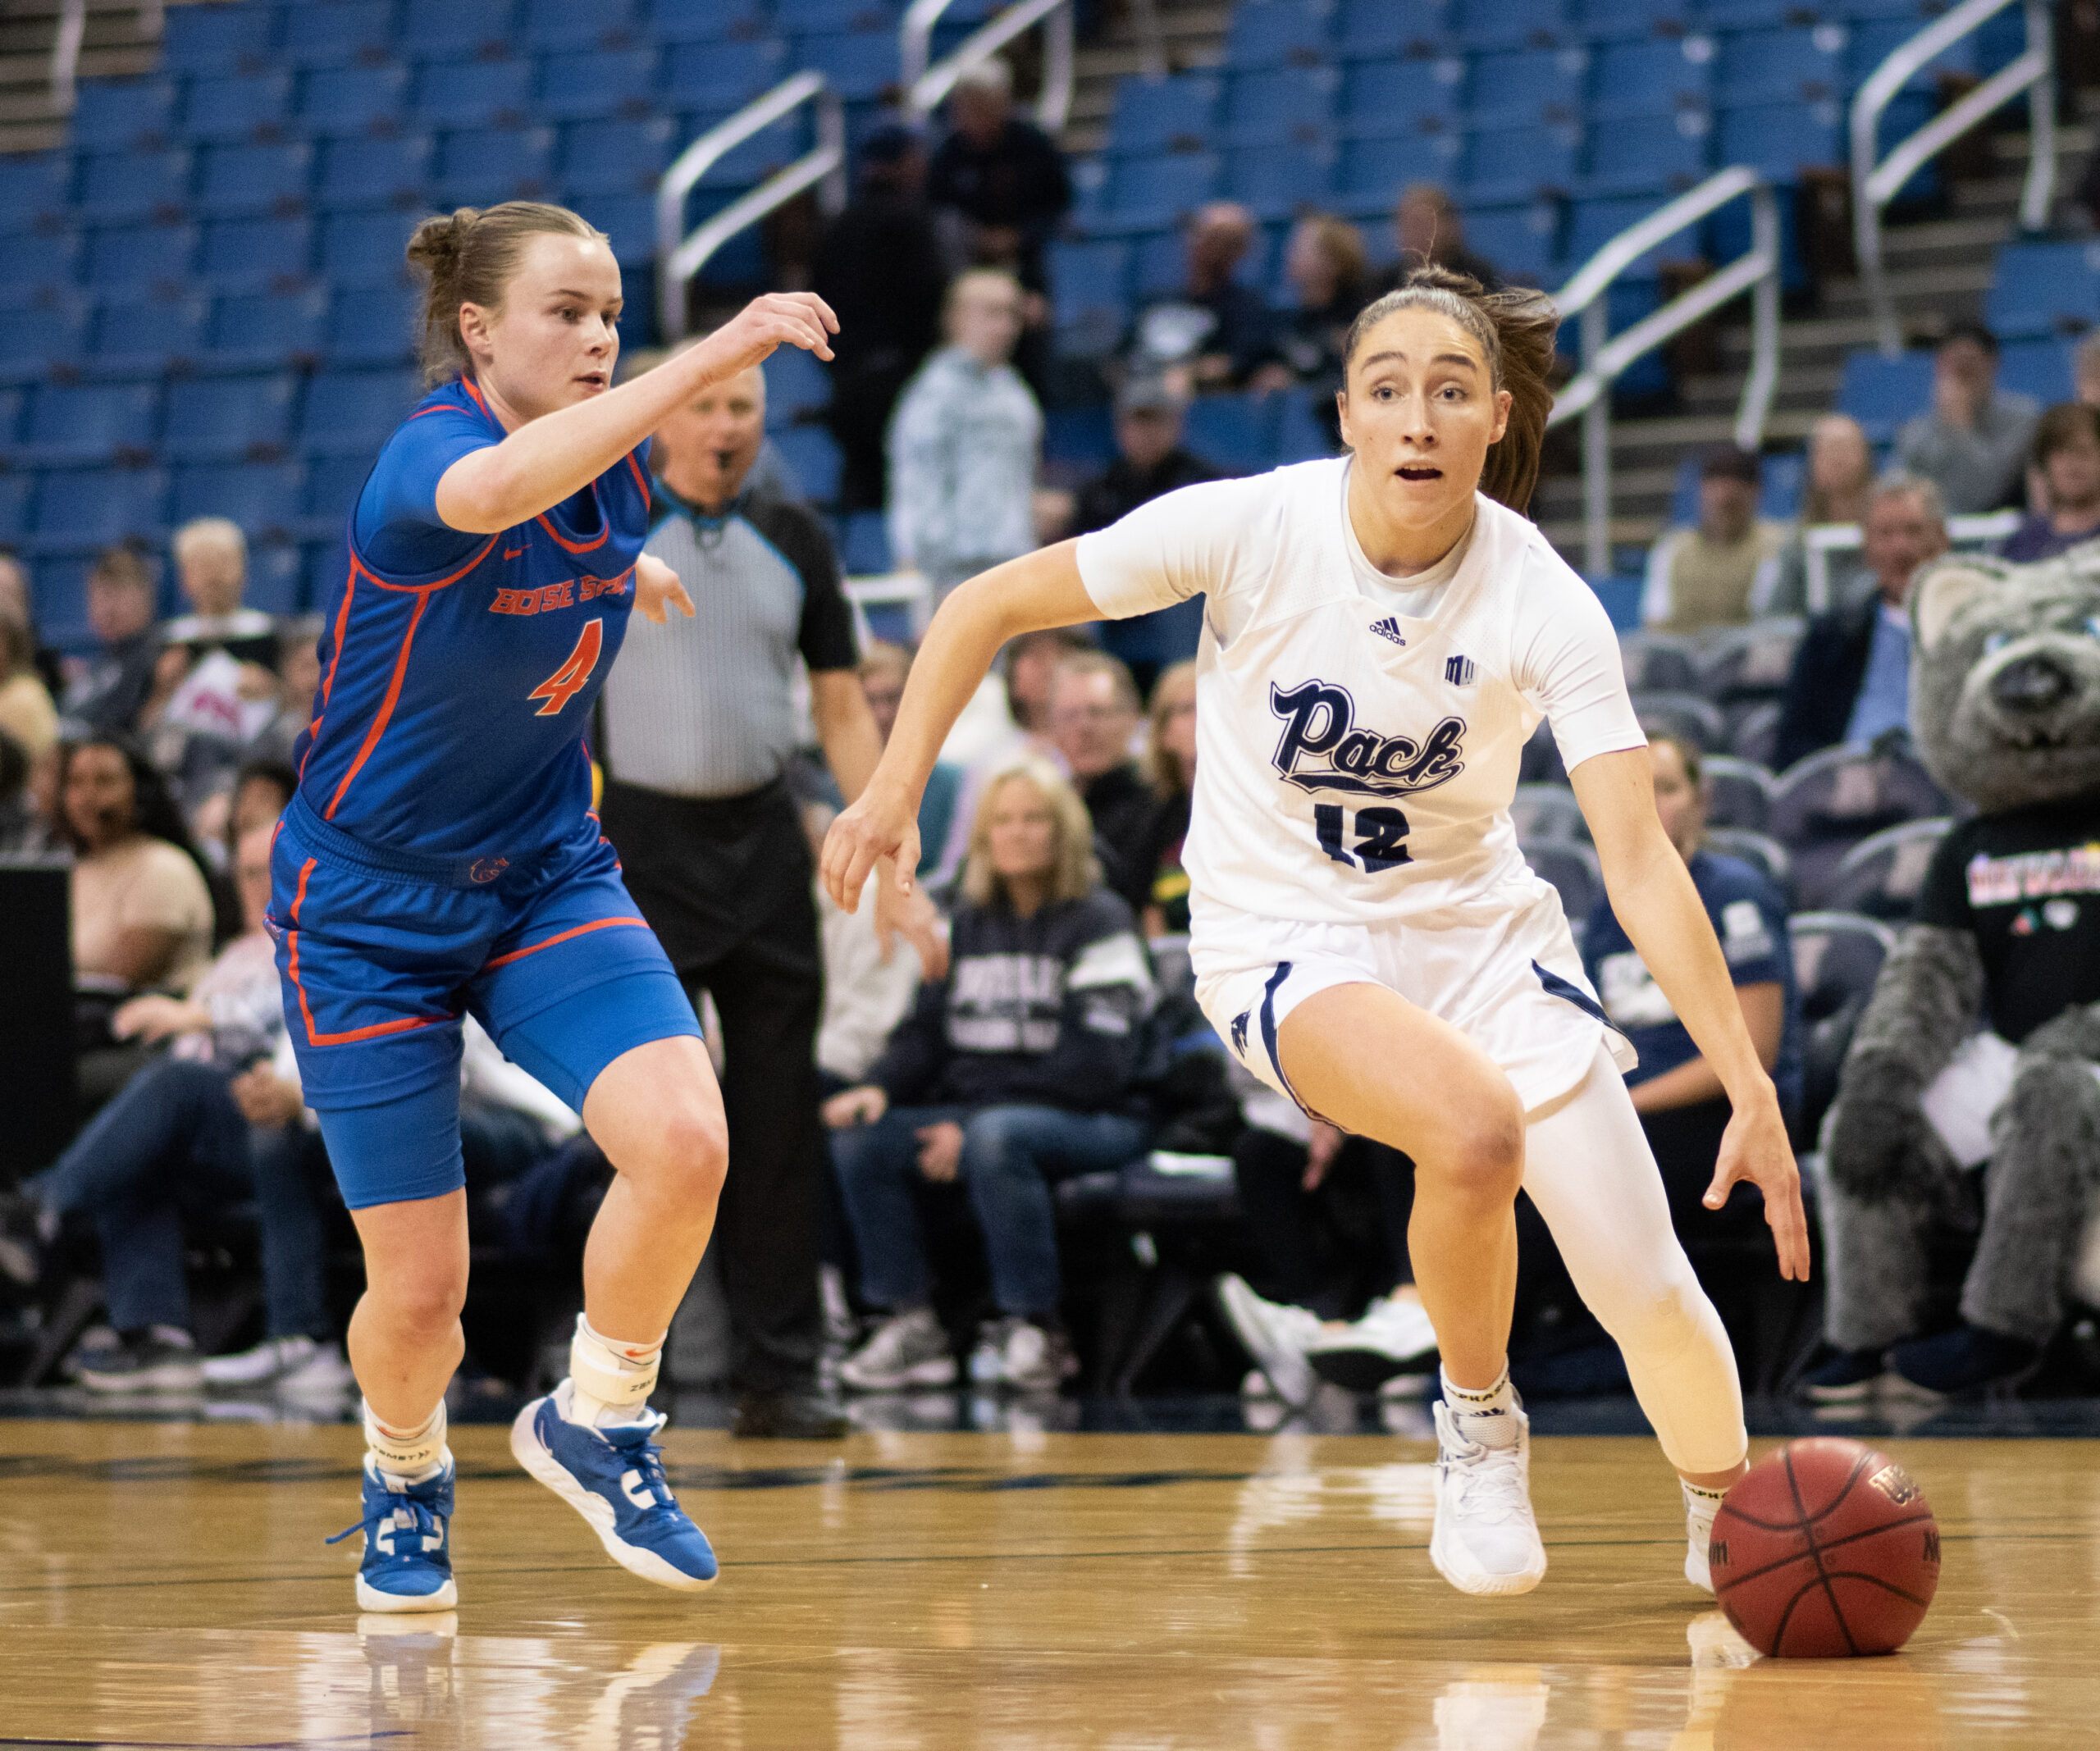 Nevada falls to Boise State 62-58 in back and forth contest